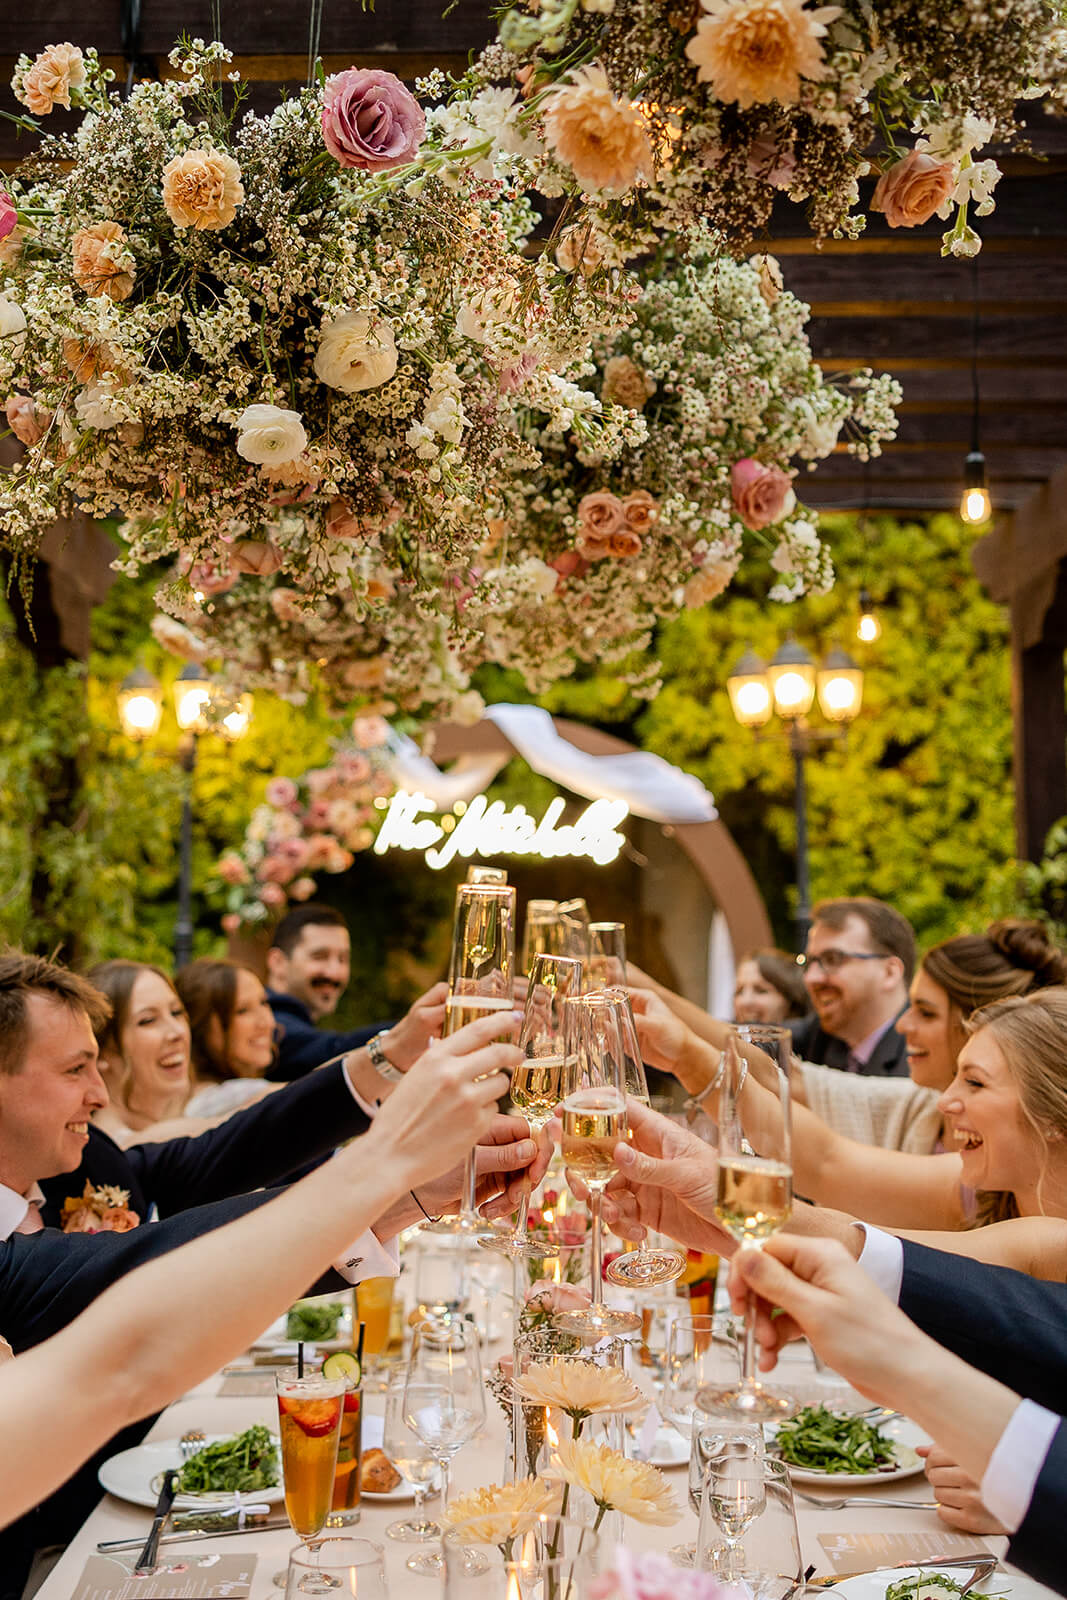 Wedding guests toast with champagne glasses at a long table under a hanging cloud floral installation at Franciscan Gardens